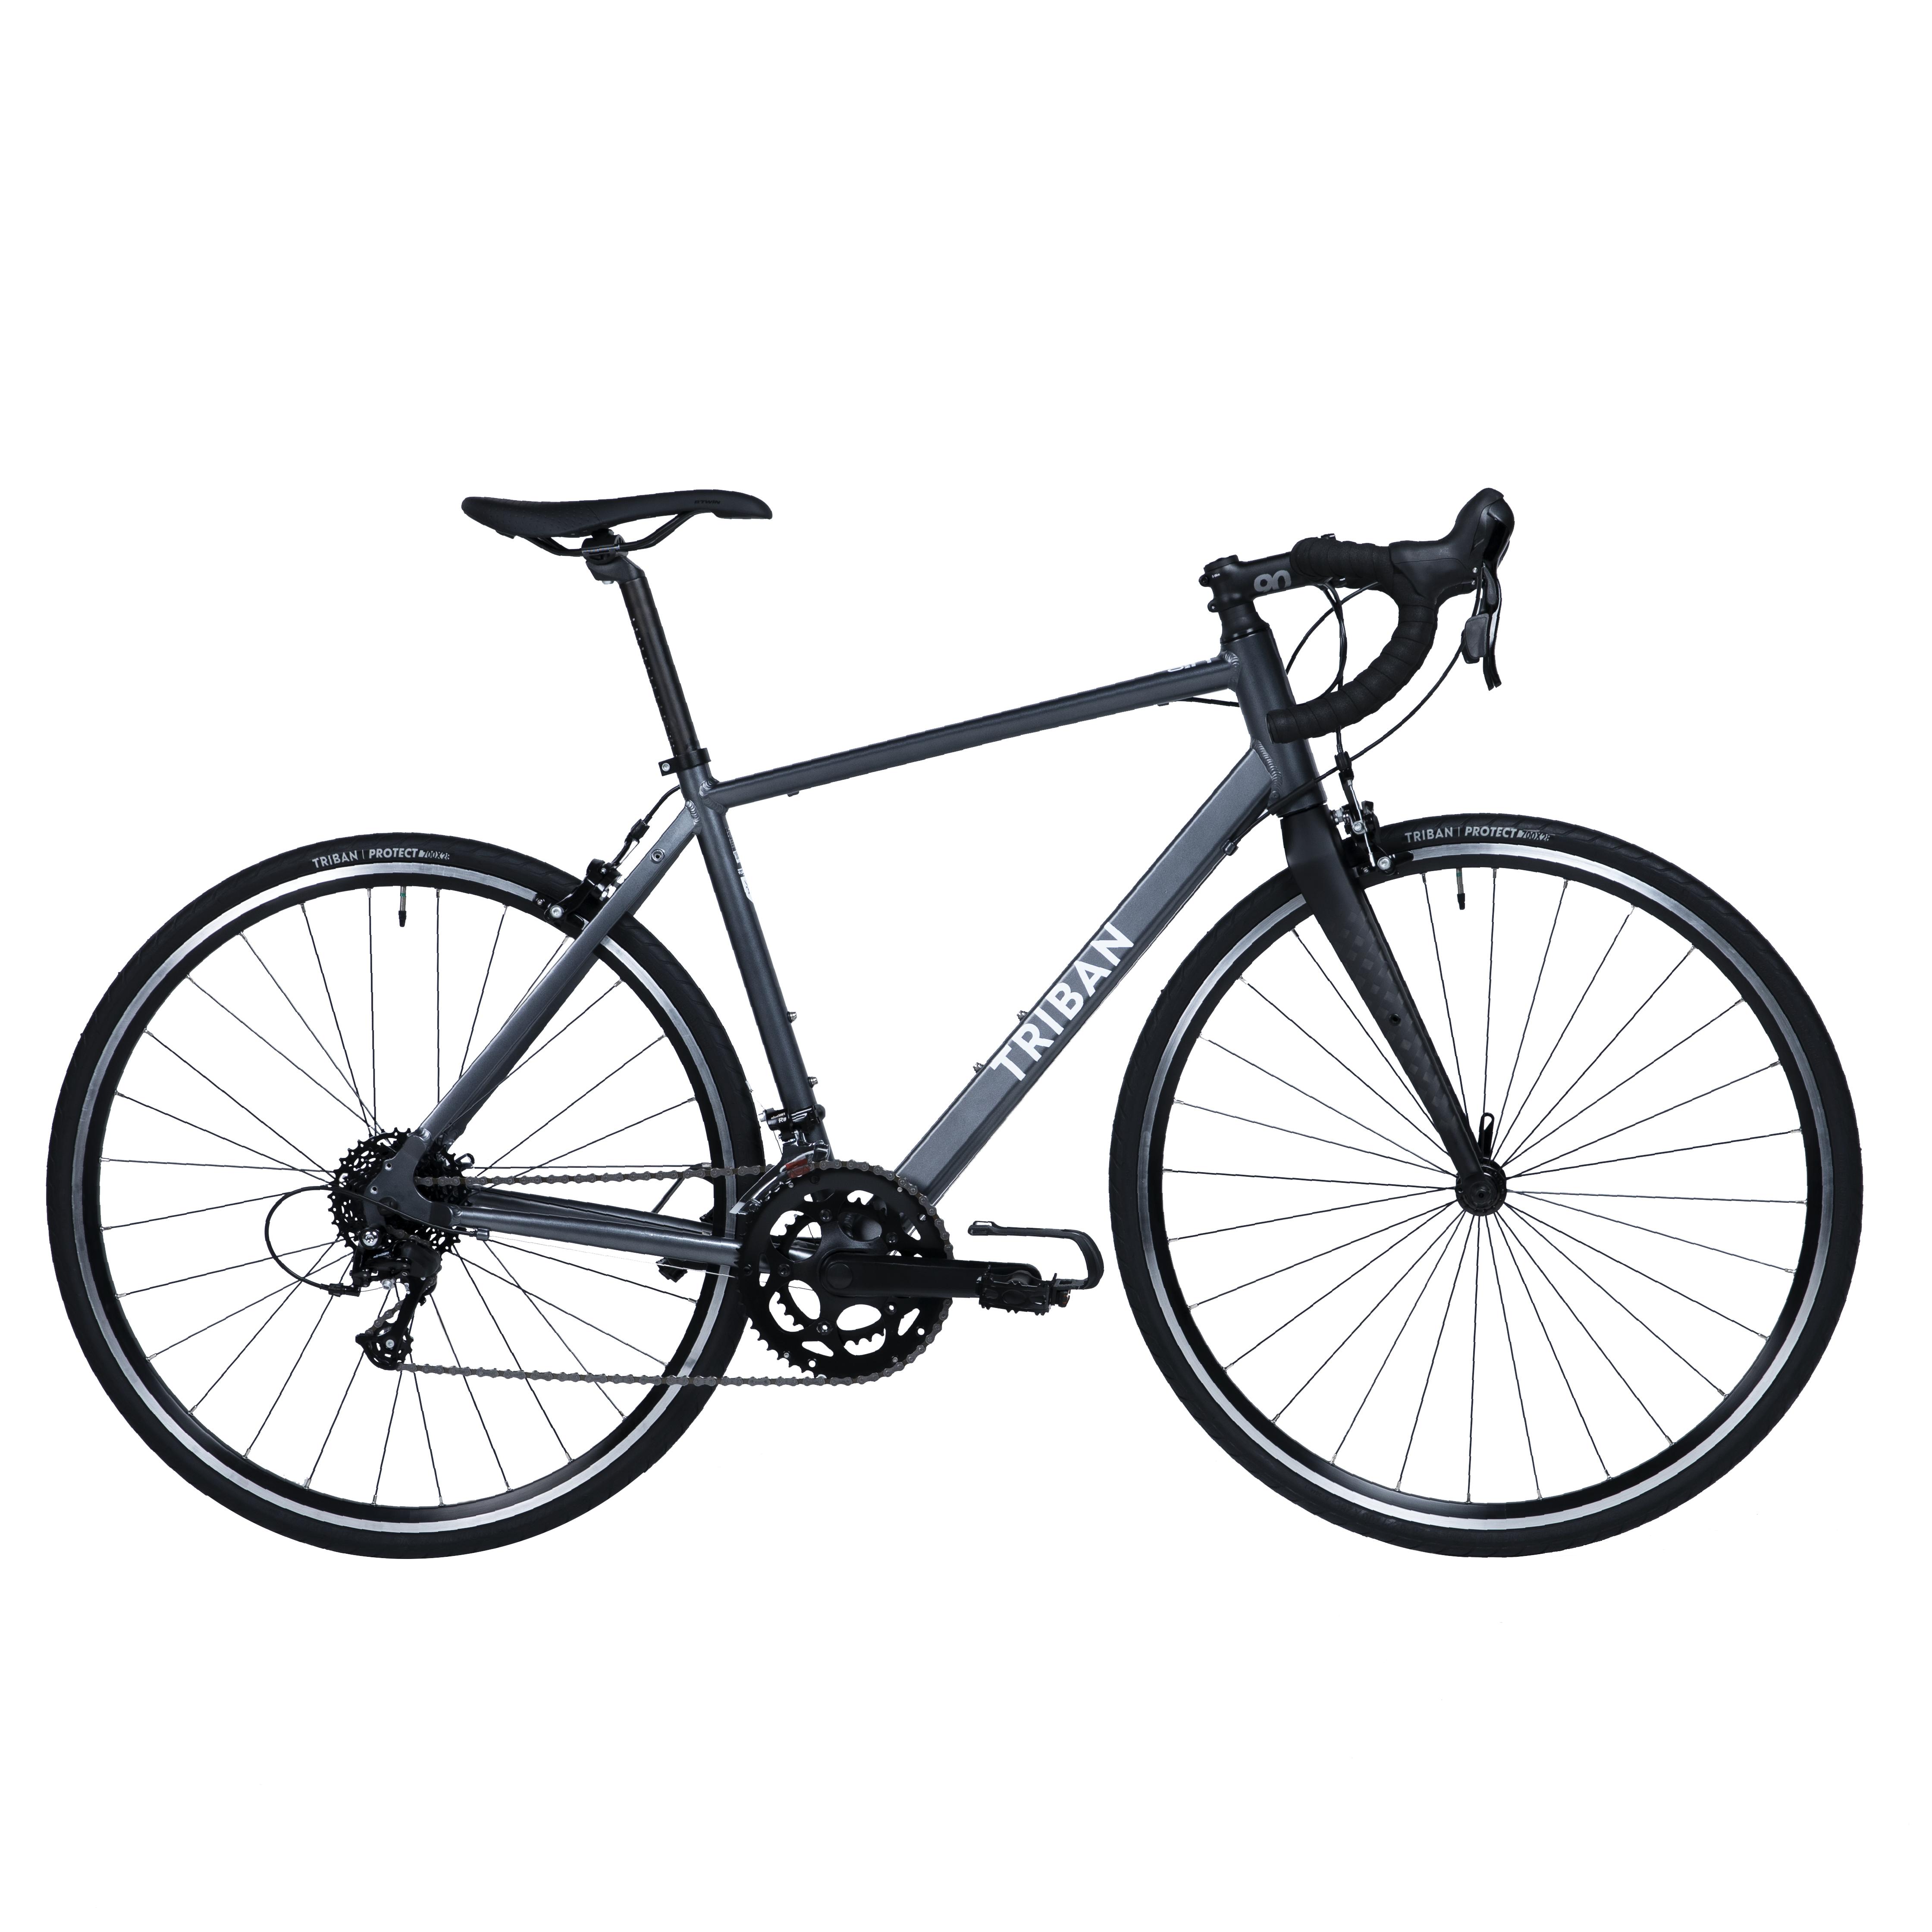 btwin cycles online shopping